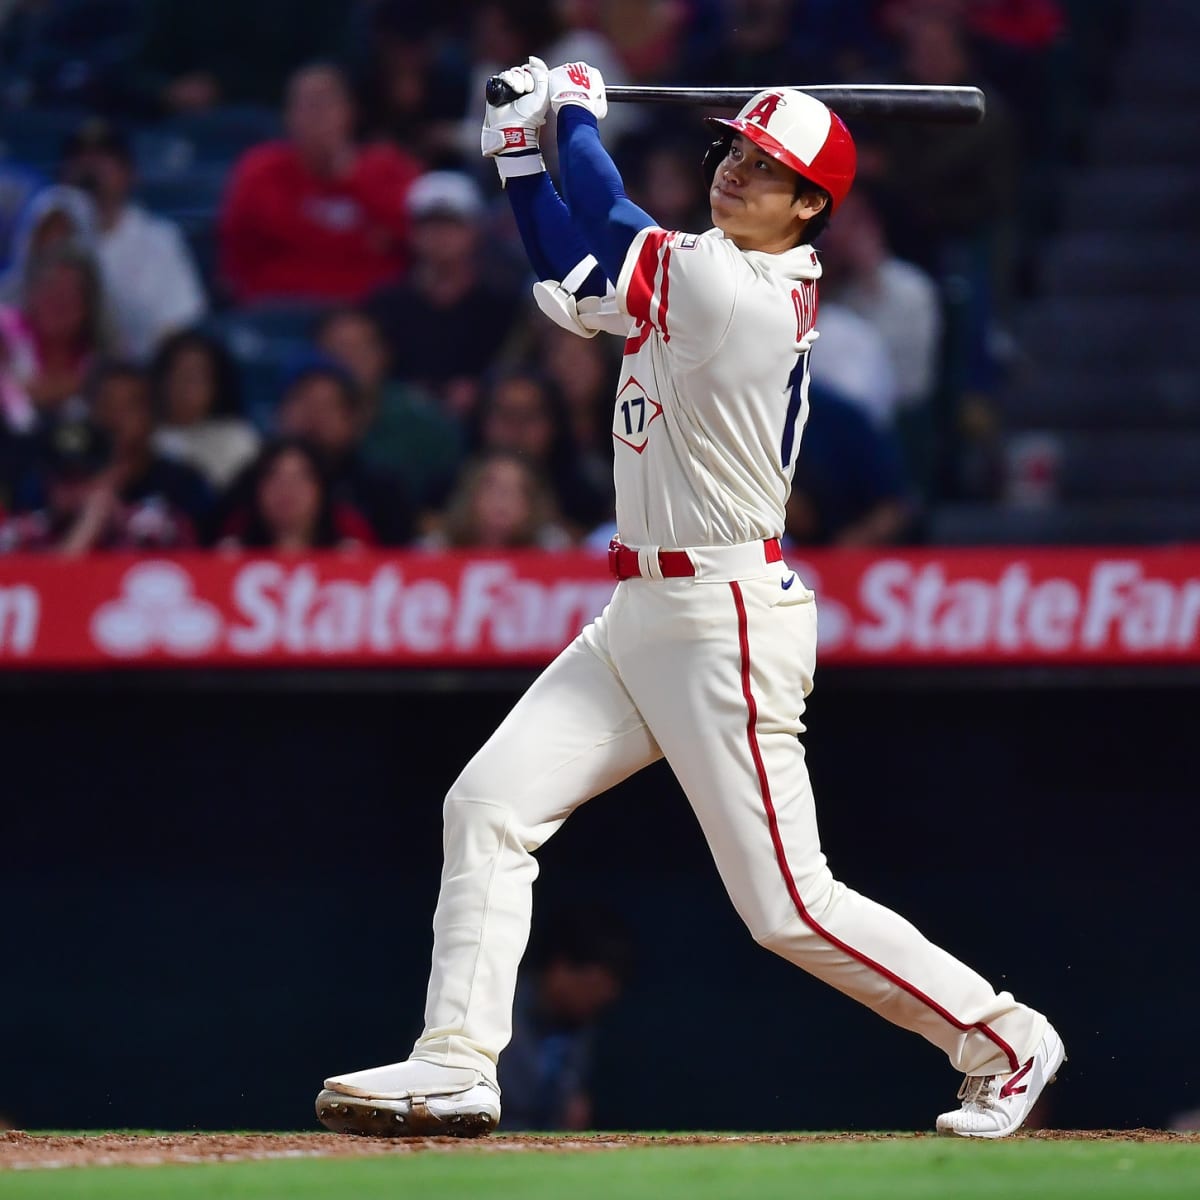 The Athletic - If Shohei Ohtani gave up a home run to the